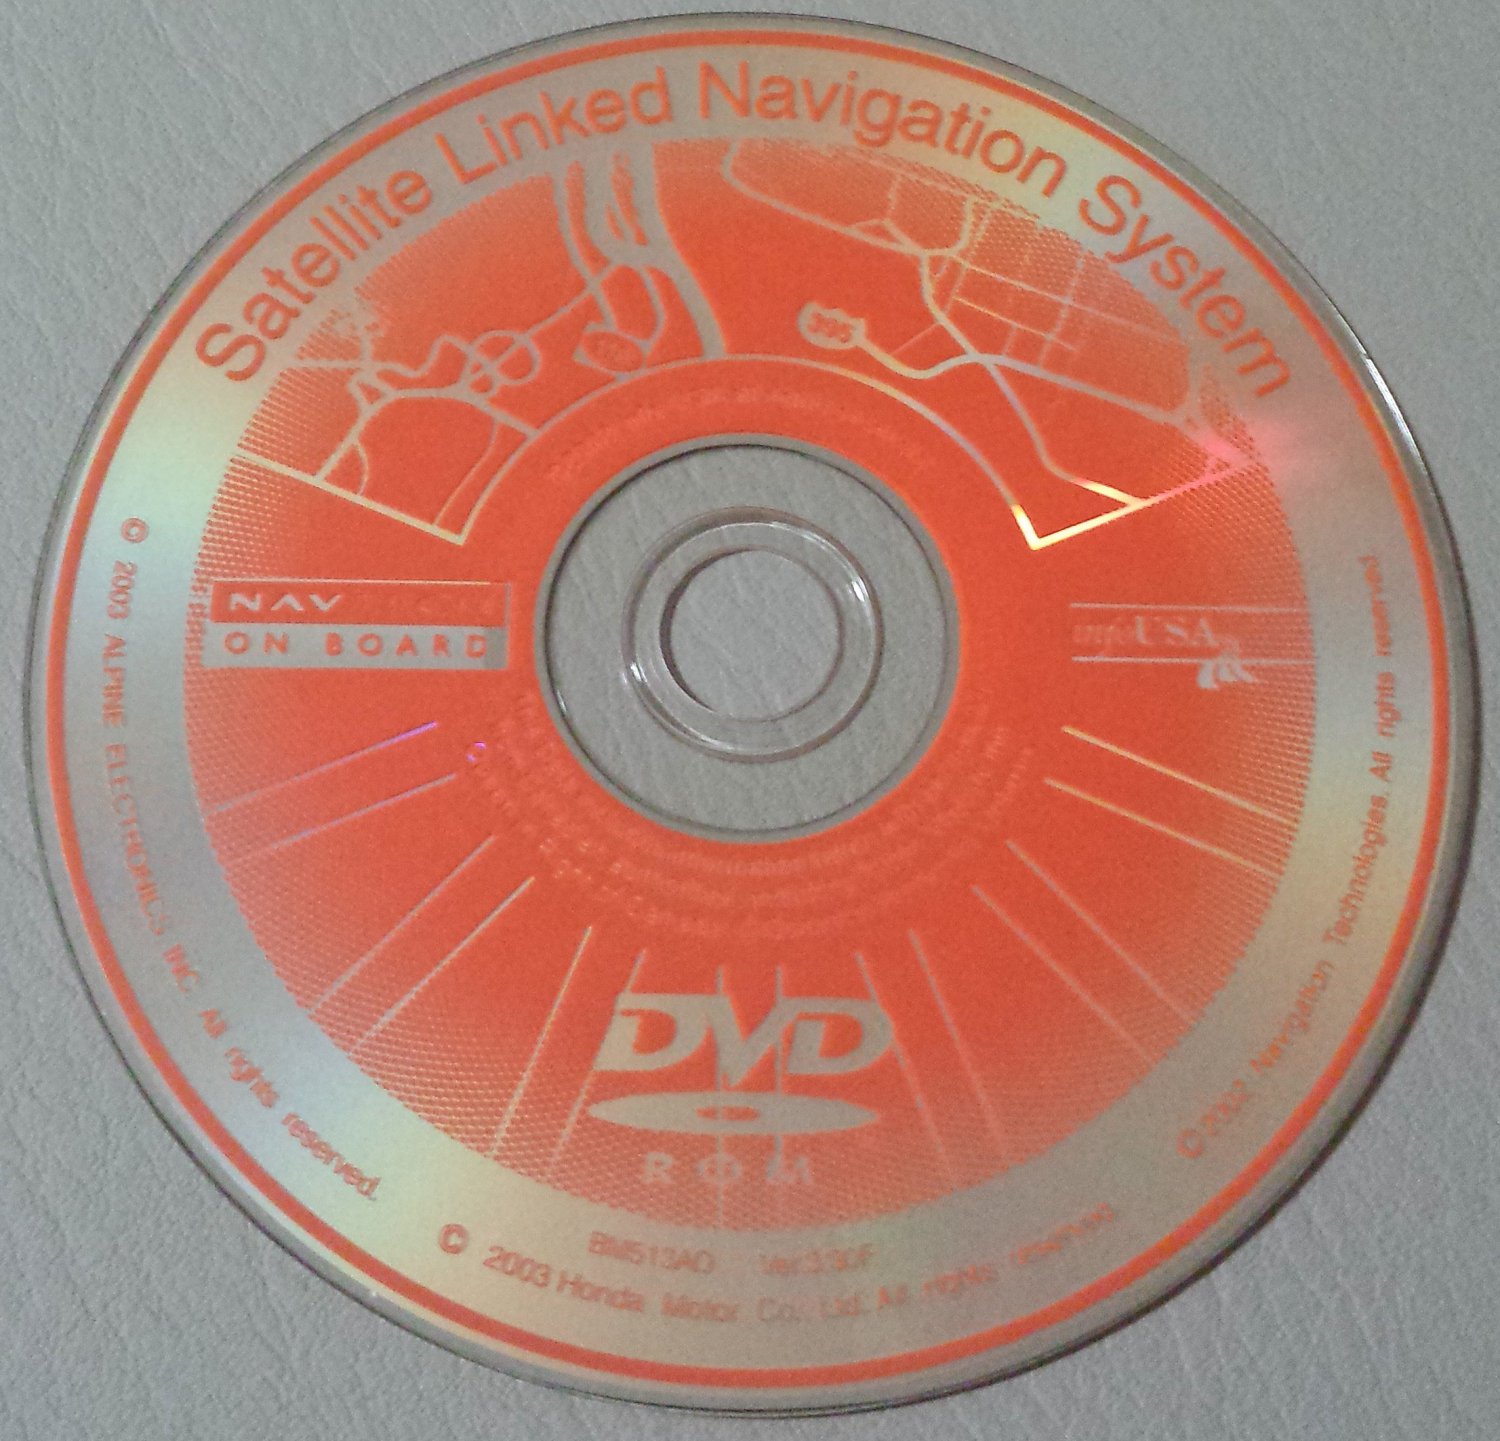 acura navigation dvd download free